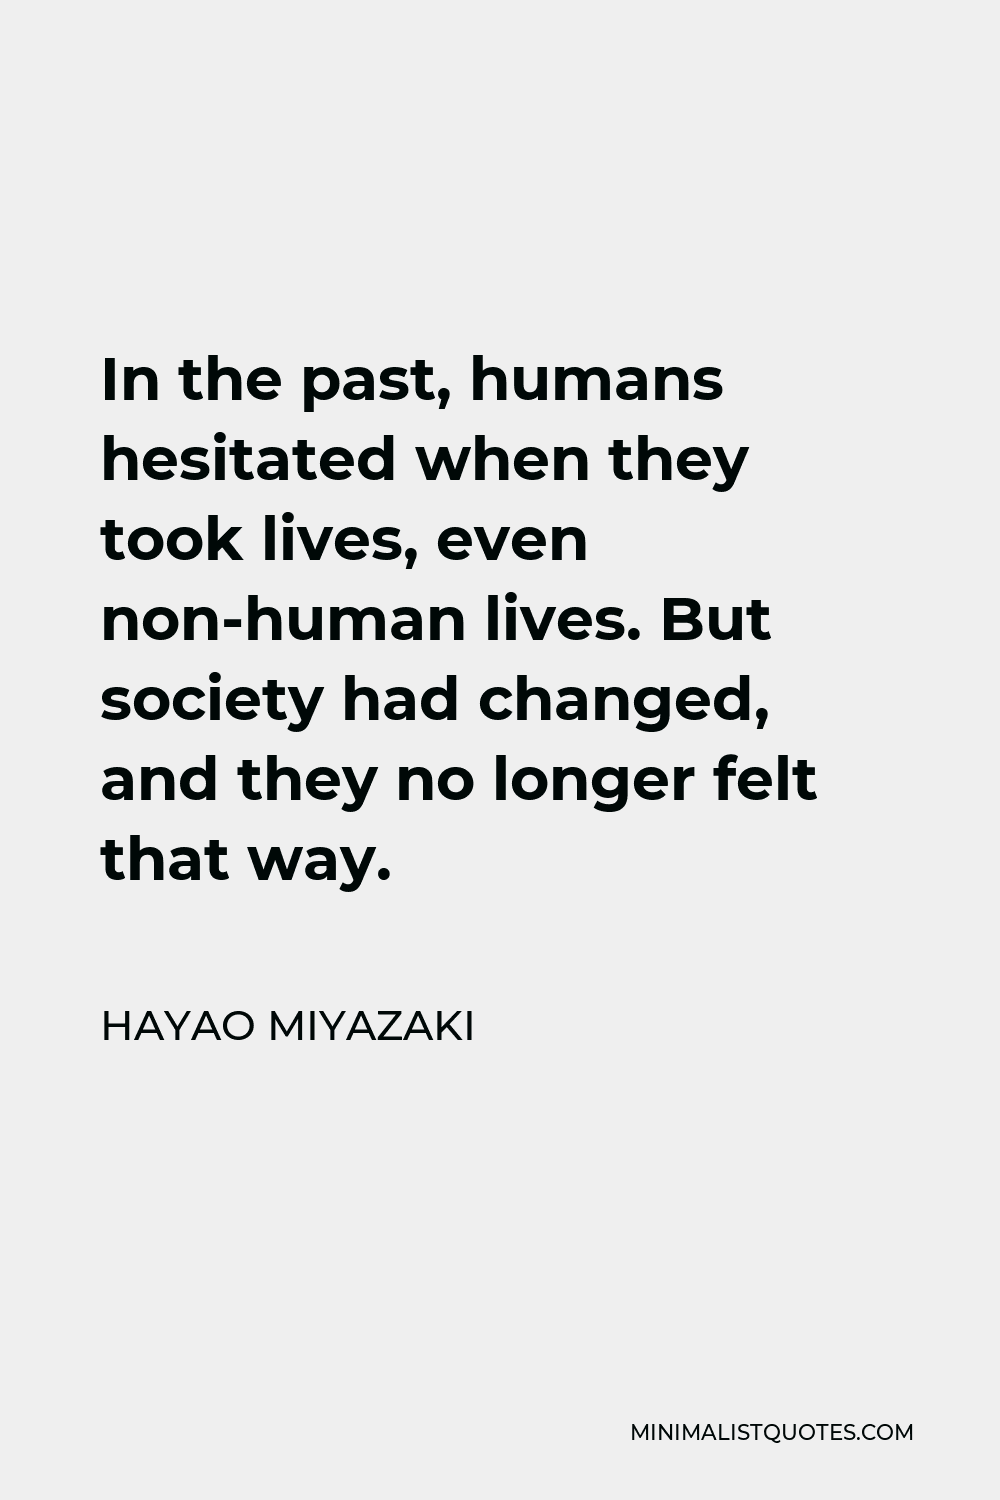 Hayao Miyazaki Quote - In the past, humans hesitated when they took lives, even non-human lives. But society had changed, and they no longer felt that way.